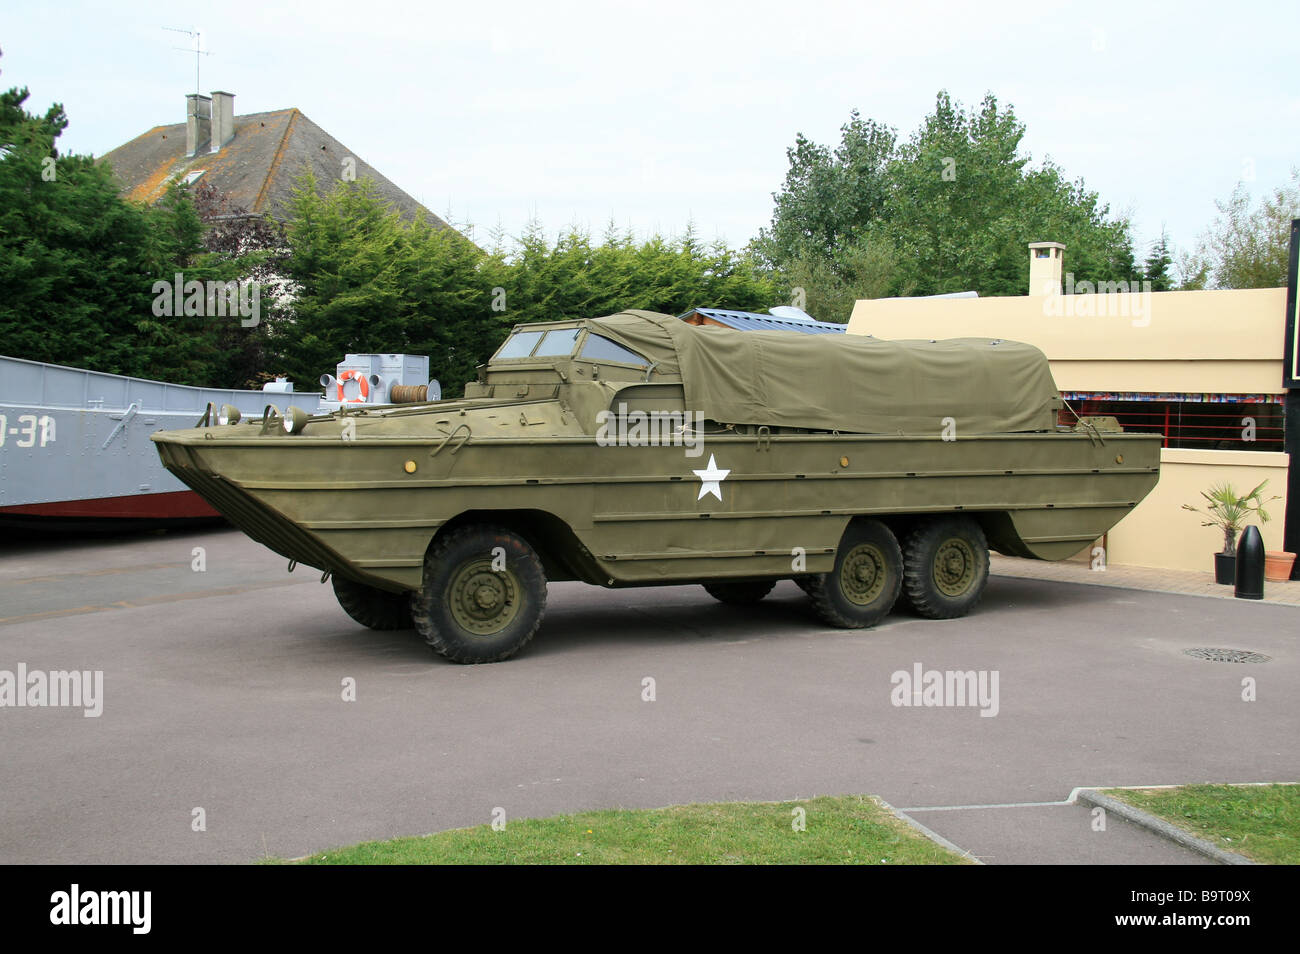 A DUKW on display at the Grand Bunker (Le Grand Bunker Musee), the Atlantic Wall Museum, Ouistreham (Sword Beach), France. Stock Photo